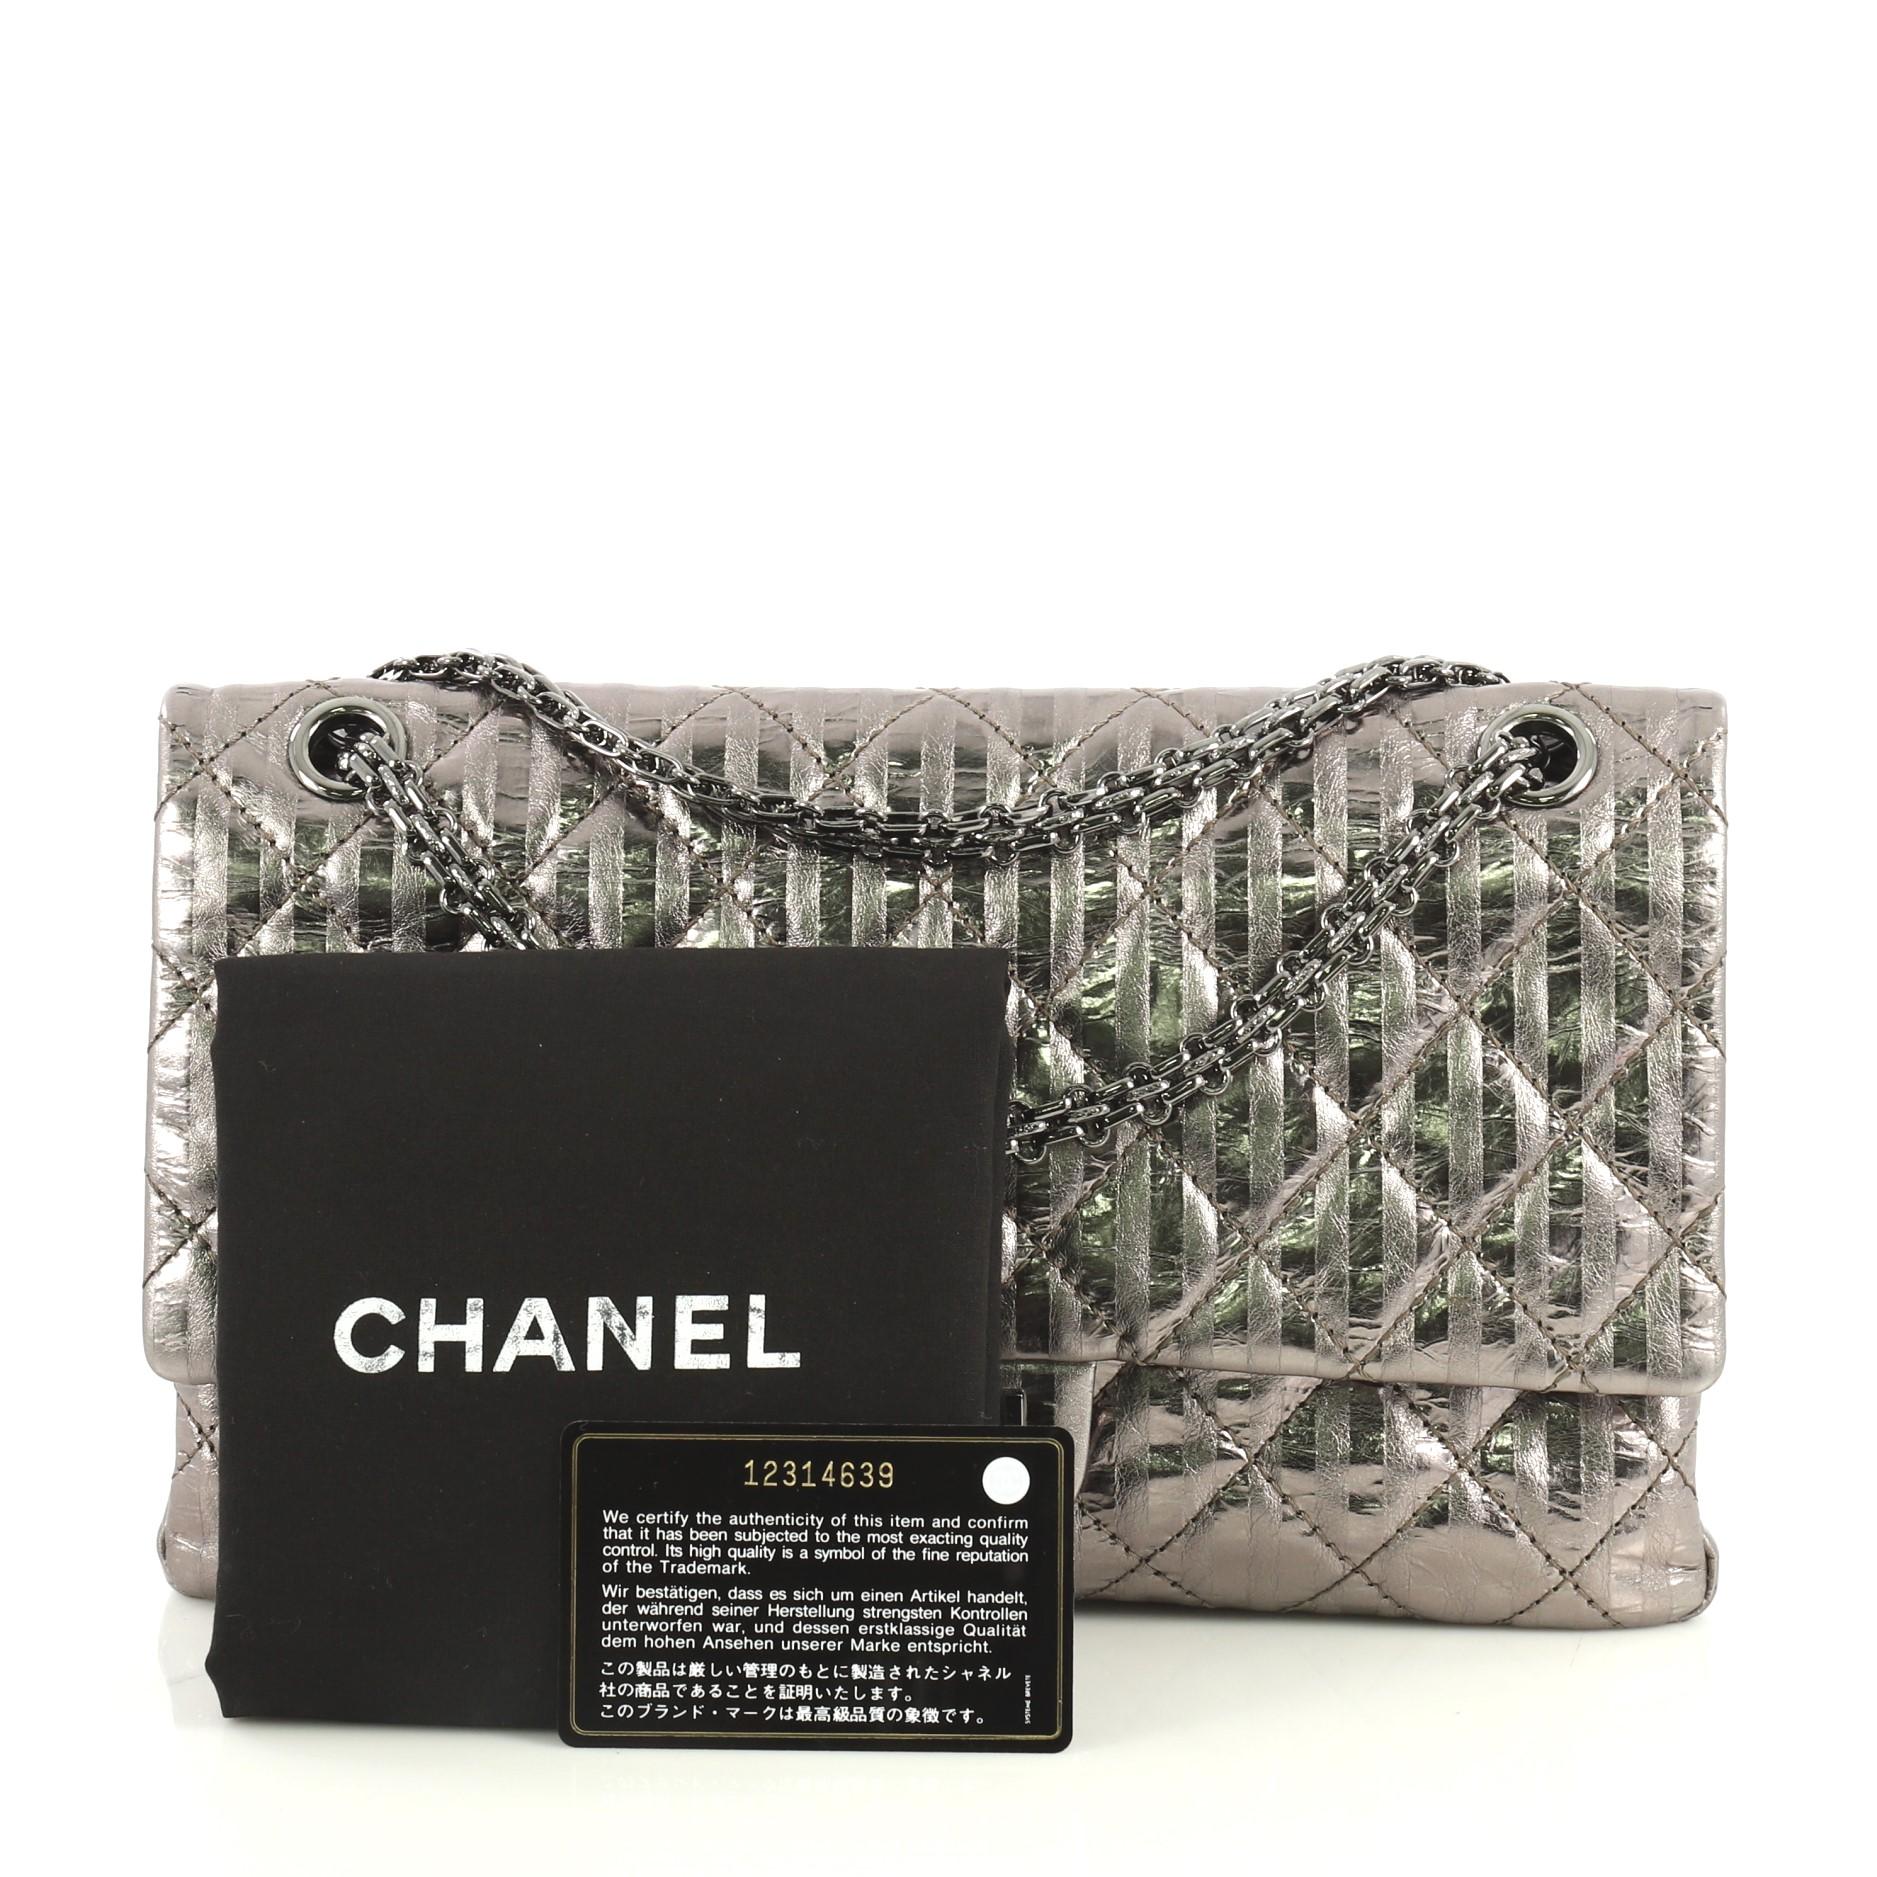 This Chanel Rayures Reissue 2.55 Handbag Quilted Calfskin 225, crafted from silver quilted calfskin leather, features reissue chain link strap and gunmetal-tone hardware. Its mademoiselle turn-lock closure opens to a dark gray metallic leather with